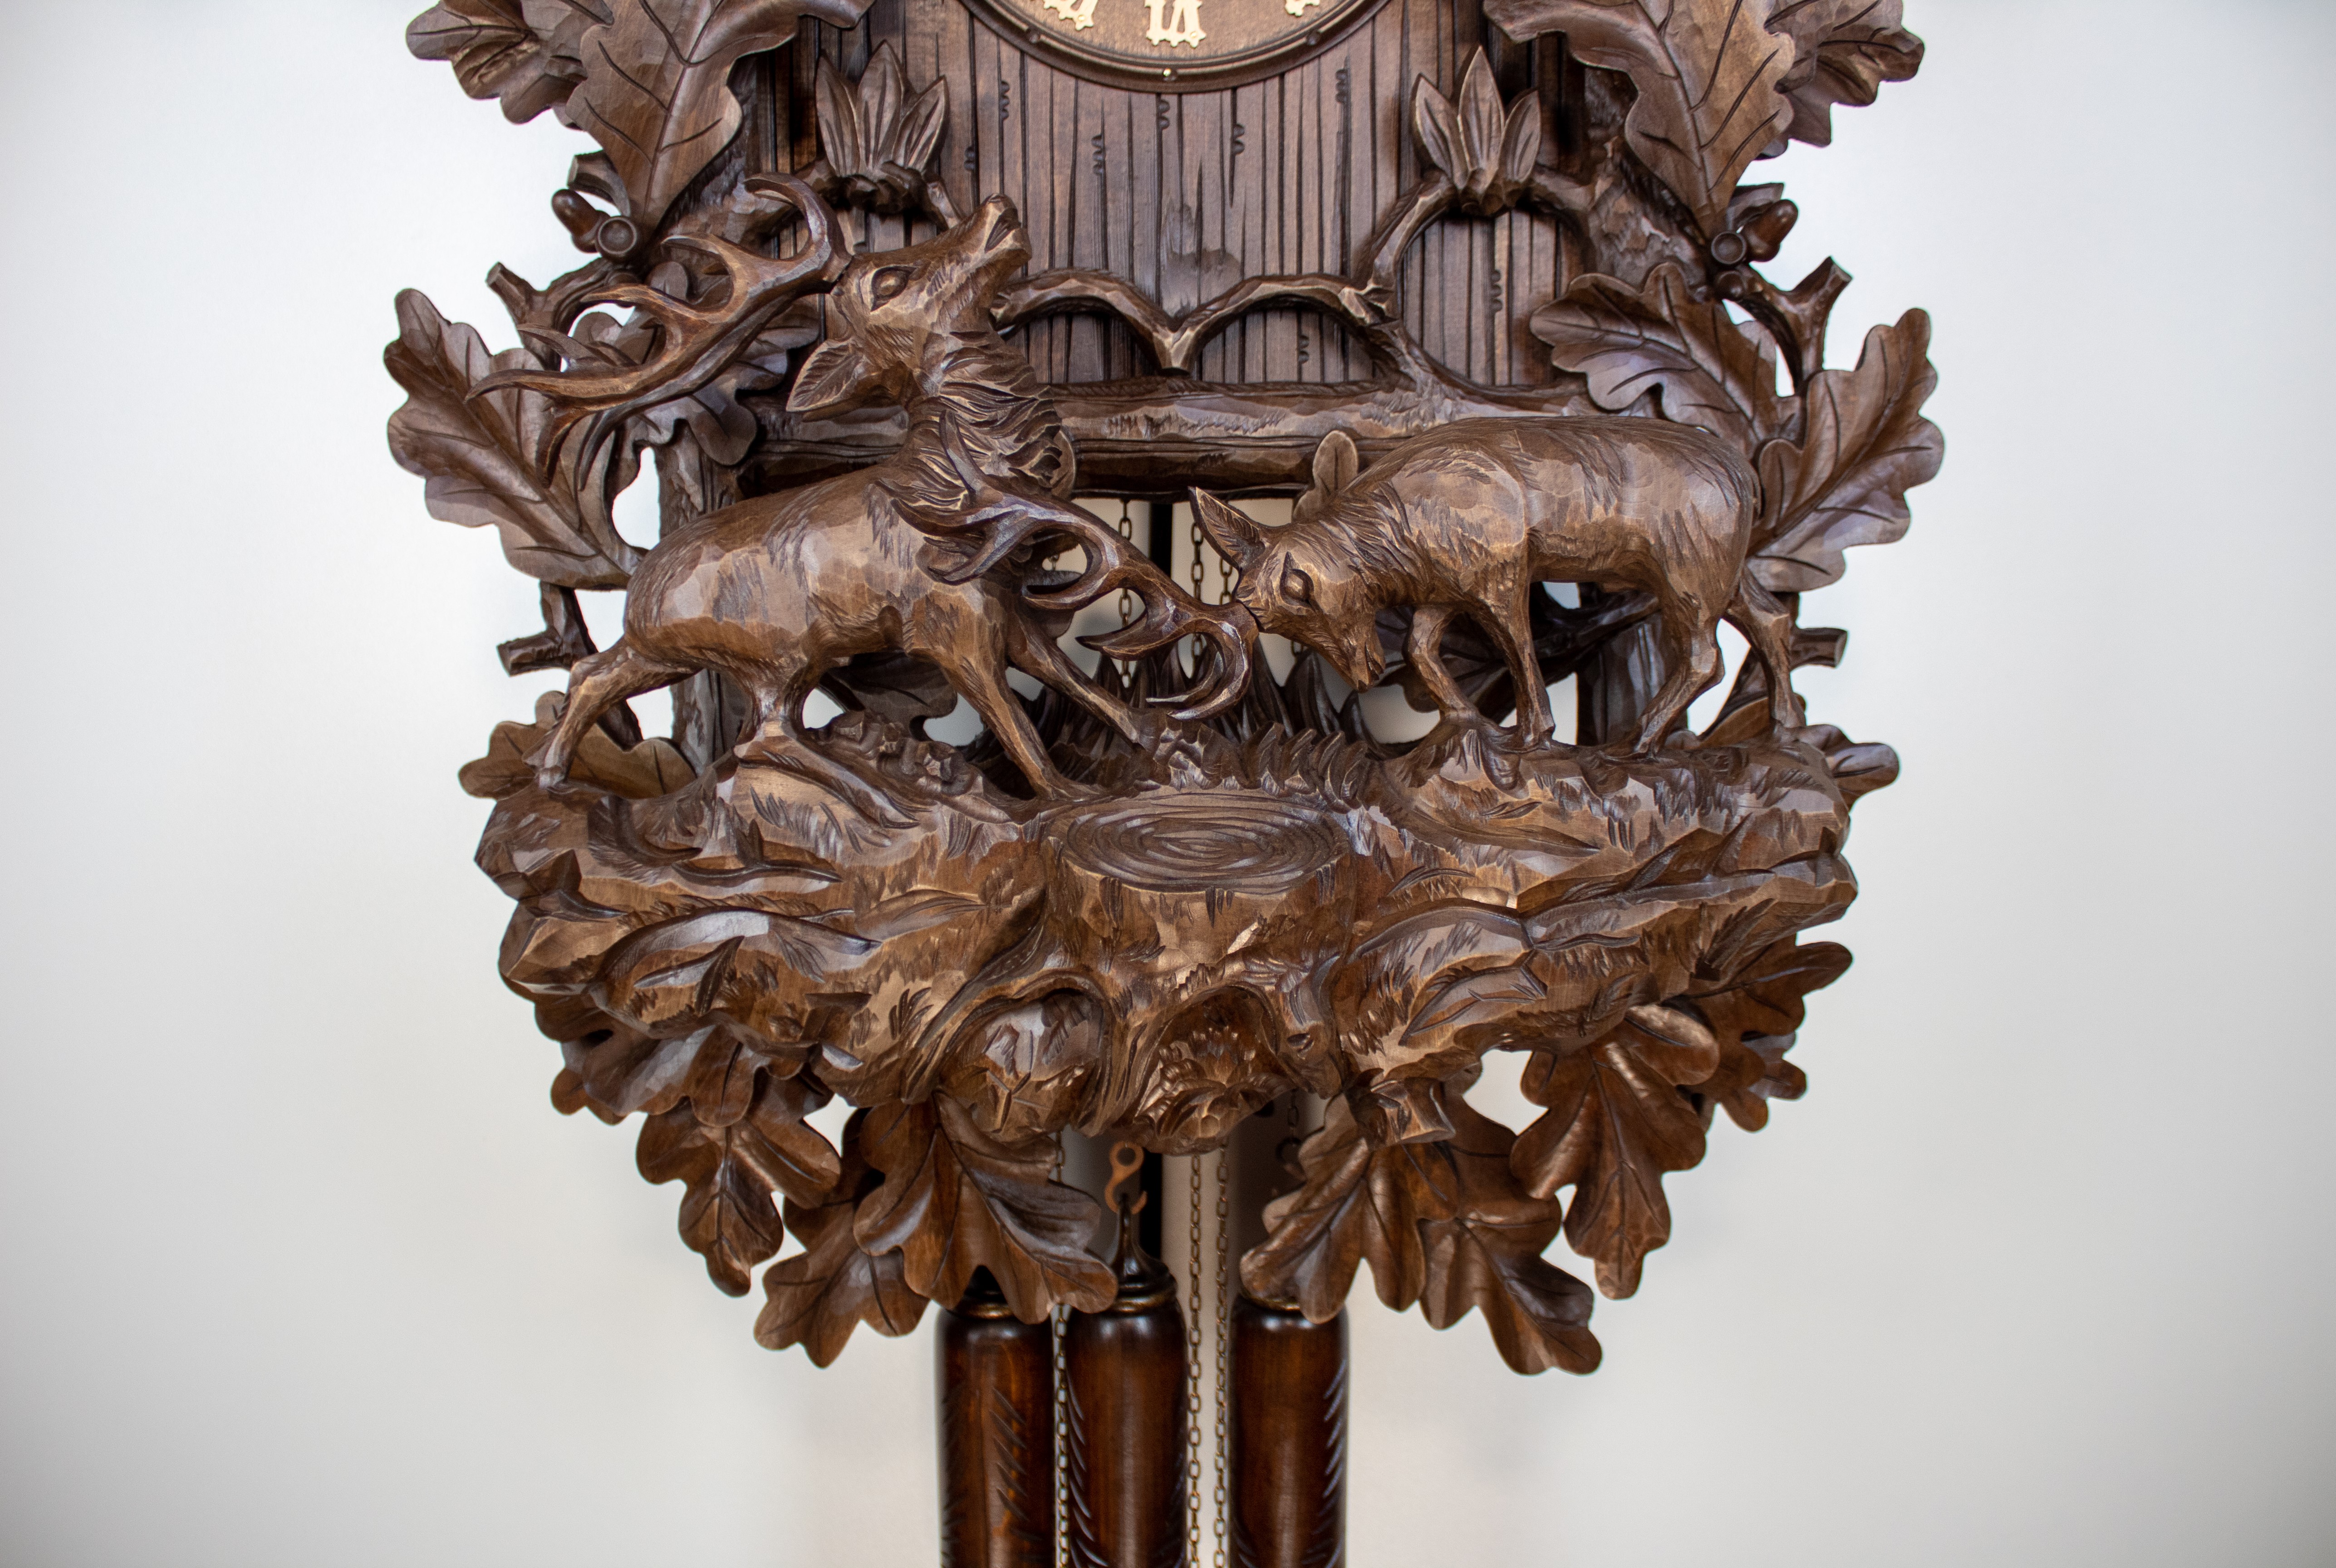 Historical 8 Days Music Dancer Cuckoo Clock with capercaillie and fighting deer 